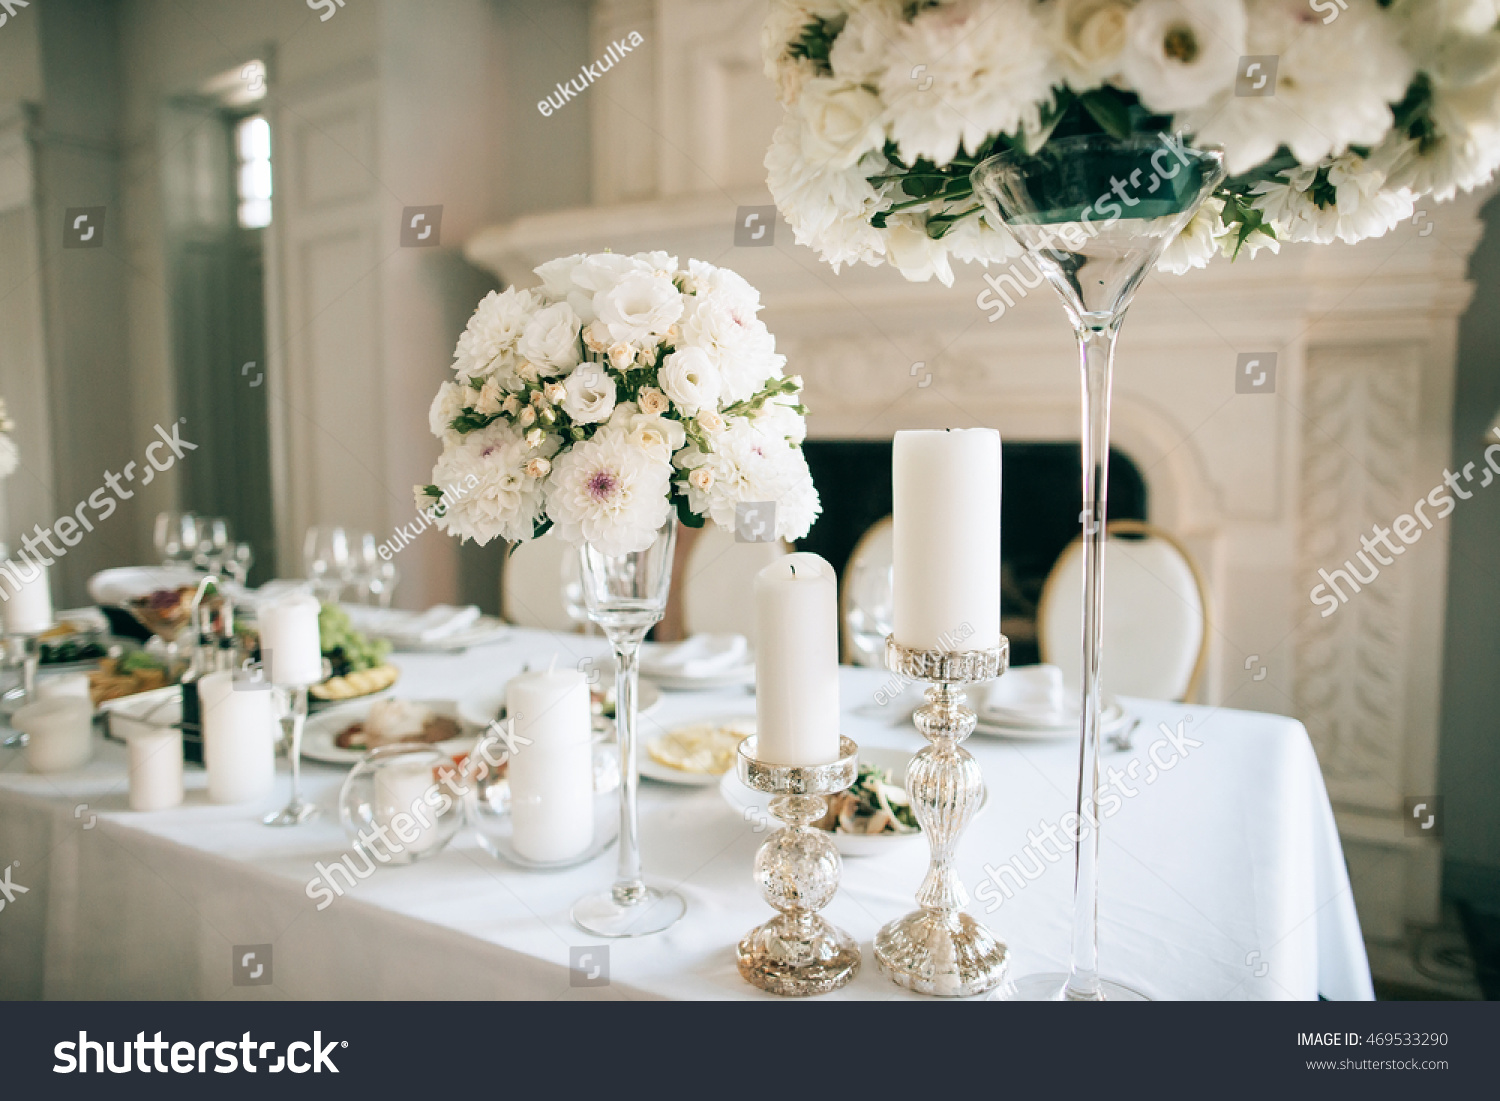 Table decor with white flowers  and candles for an event party or wedding reception #469533290